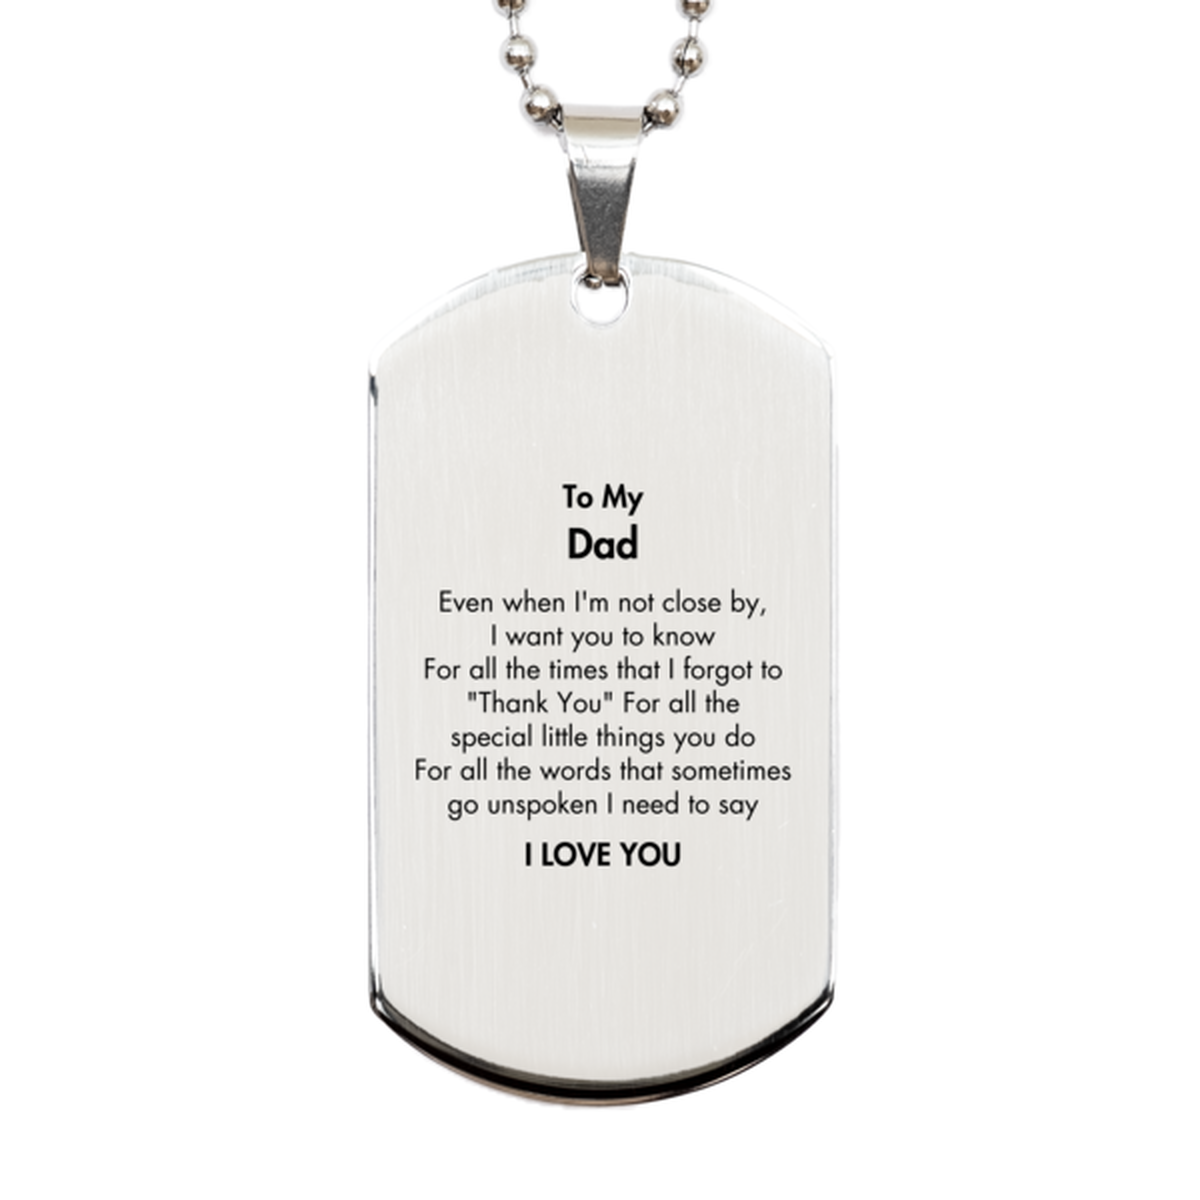 Thank You Gifts for Dad, Keepsake Silver Dog Tag Gifts for Dad Birthday Mother's day Father's Day Dad For all the words That sometimes go unspoken I need to say I LOVE YOU